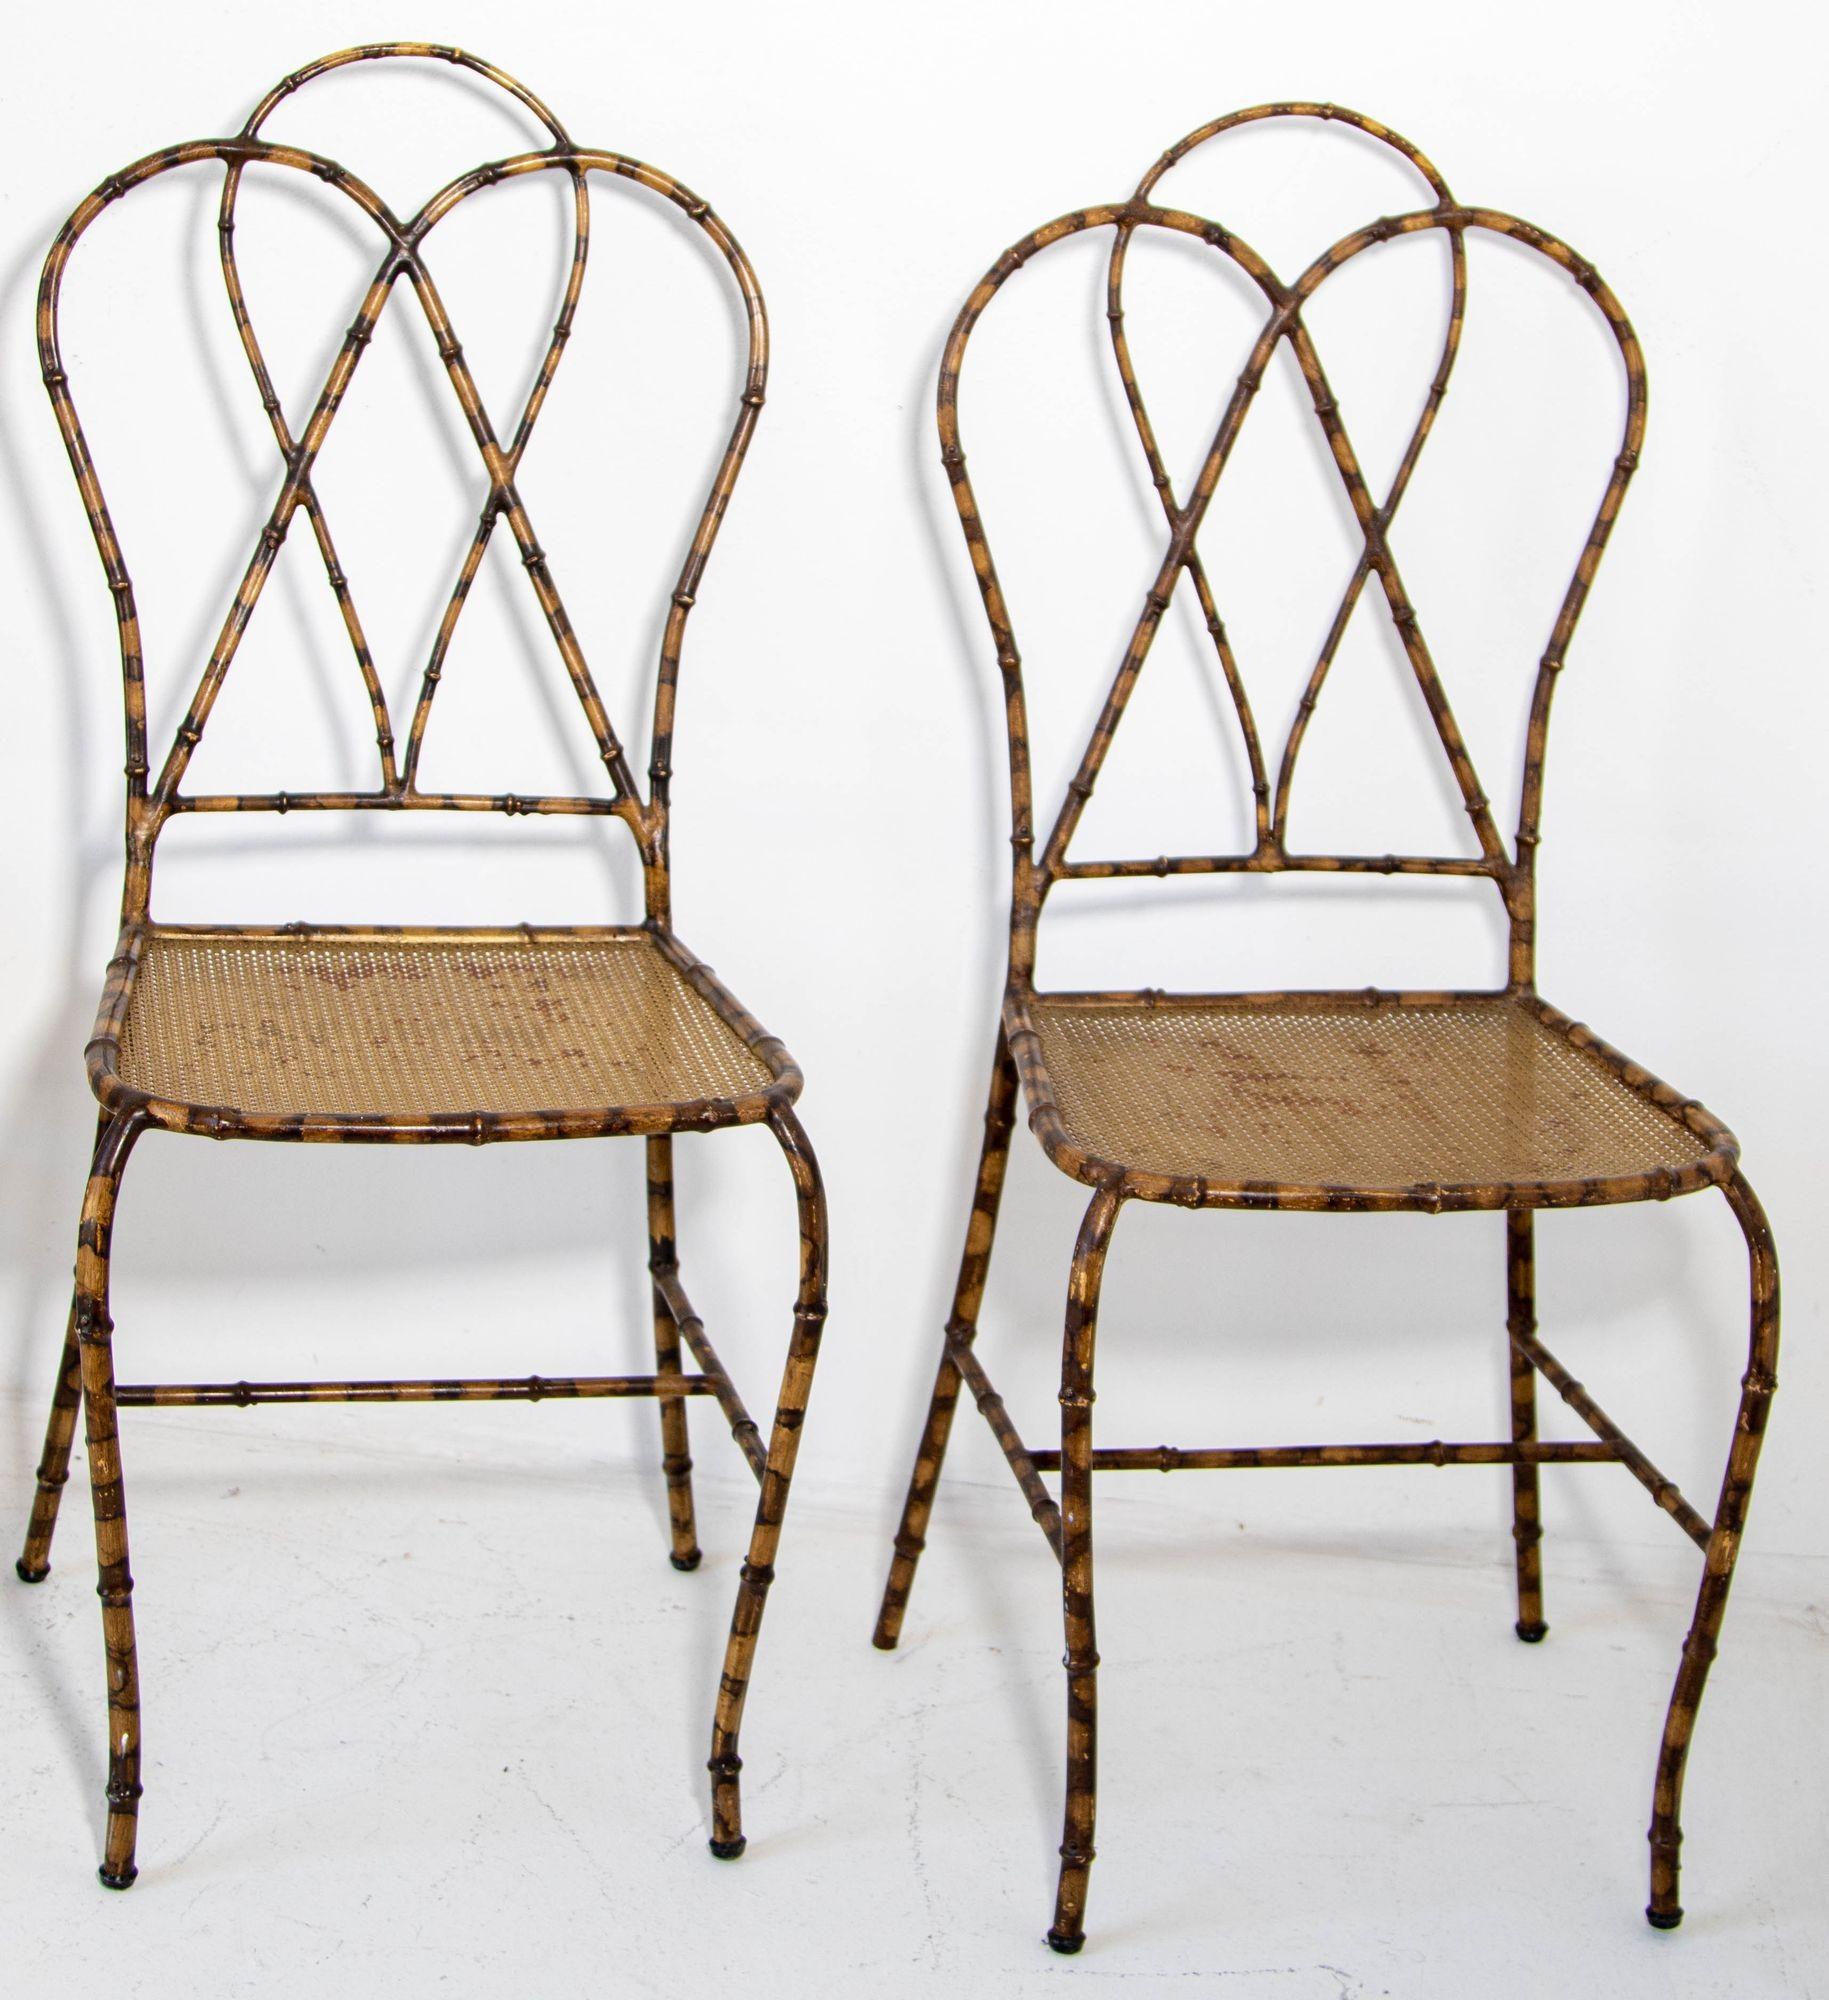 Hand-Crafted Italian Gilt Metal Faux Bamboo Dining Chairs 1950s Set of 4 For Sale